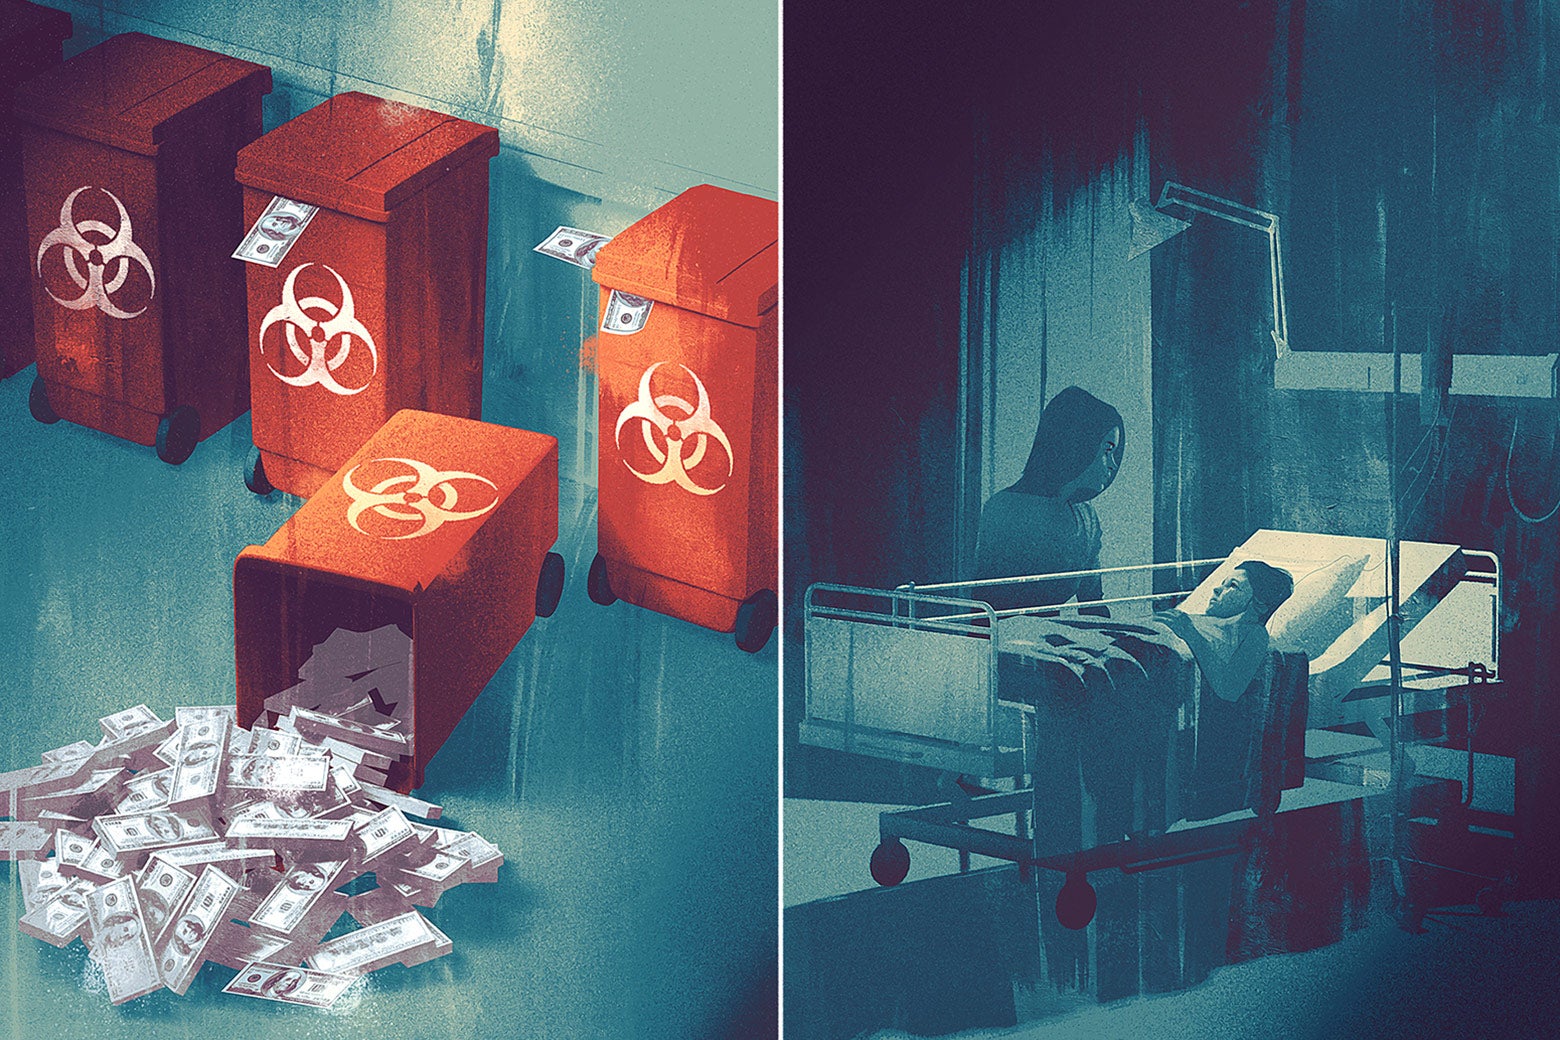 Diptych of a hazardous waste can with money falling out of it and a child on a hospital bed.